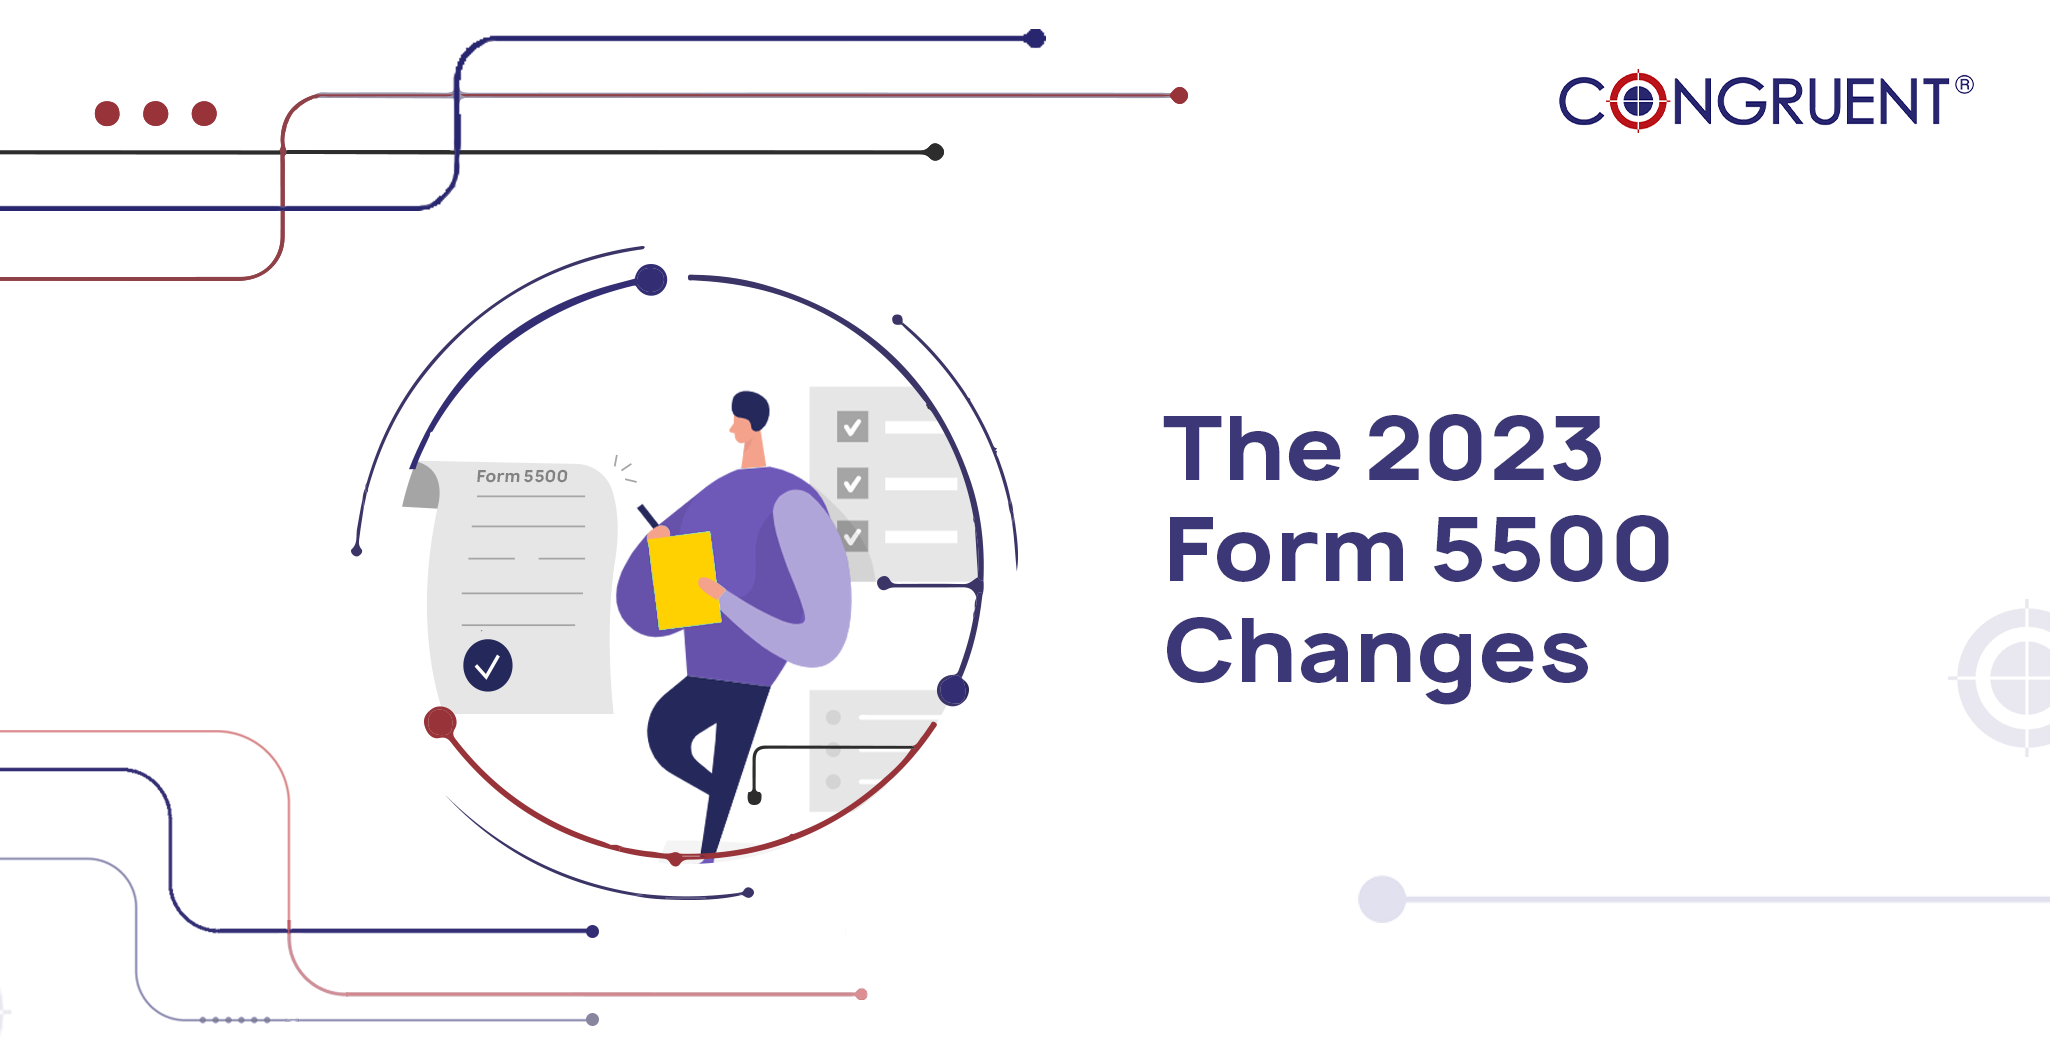 The 2023 Form 5500 Changes